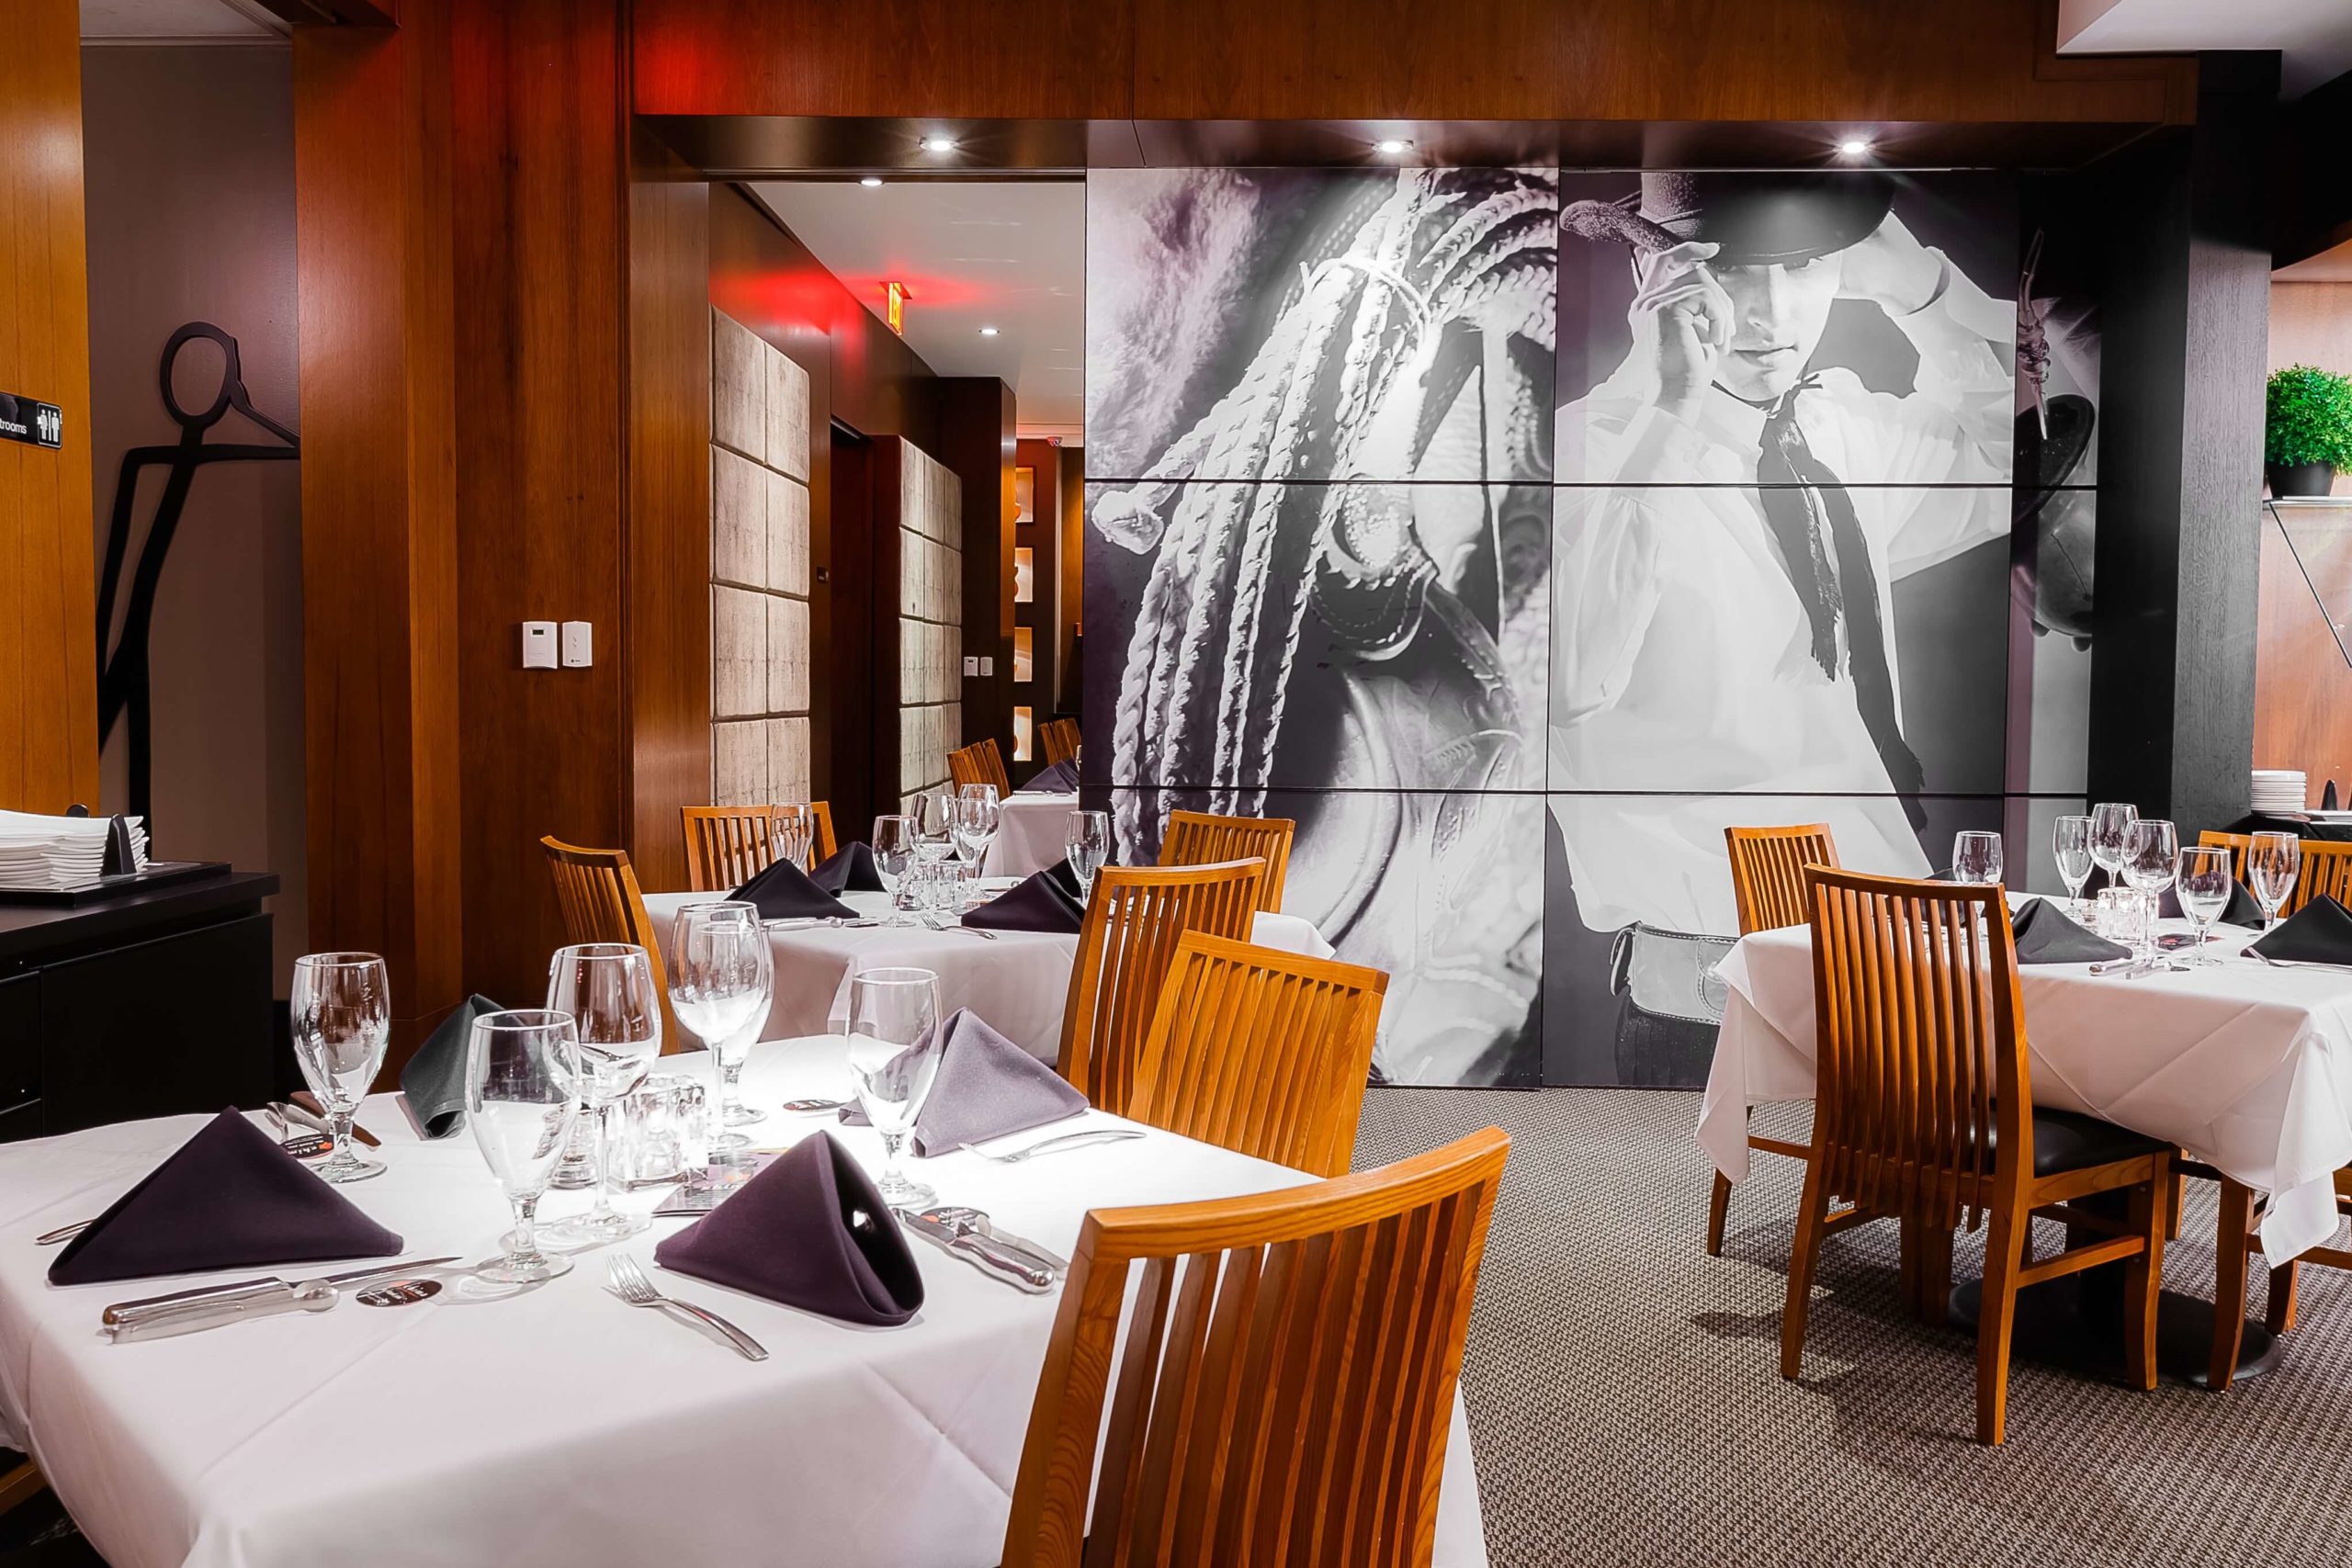 Are you looking for a Fine Dining Experience in Tysons Corner?